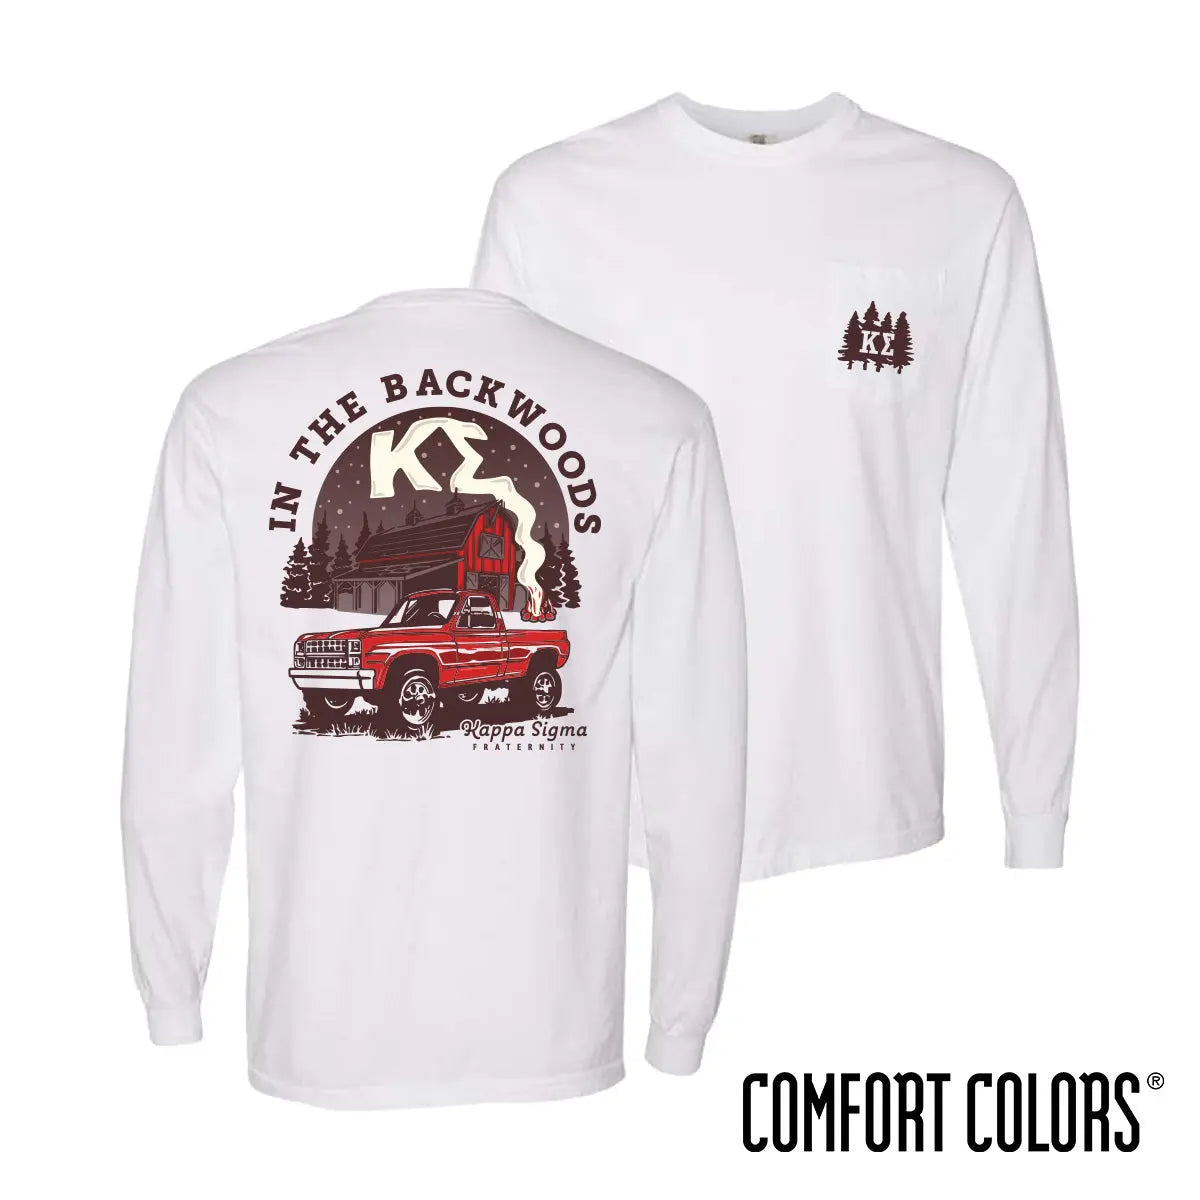 New! Kappa Sig Comfort Colors Country Roads Long Sleeve Tee - Kappa Sigma Official Store